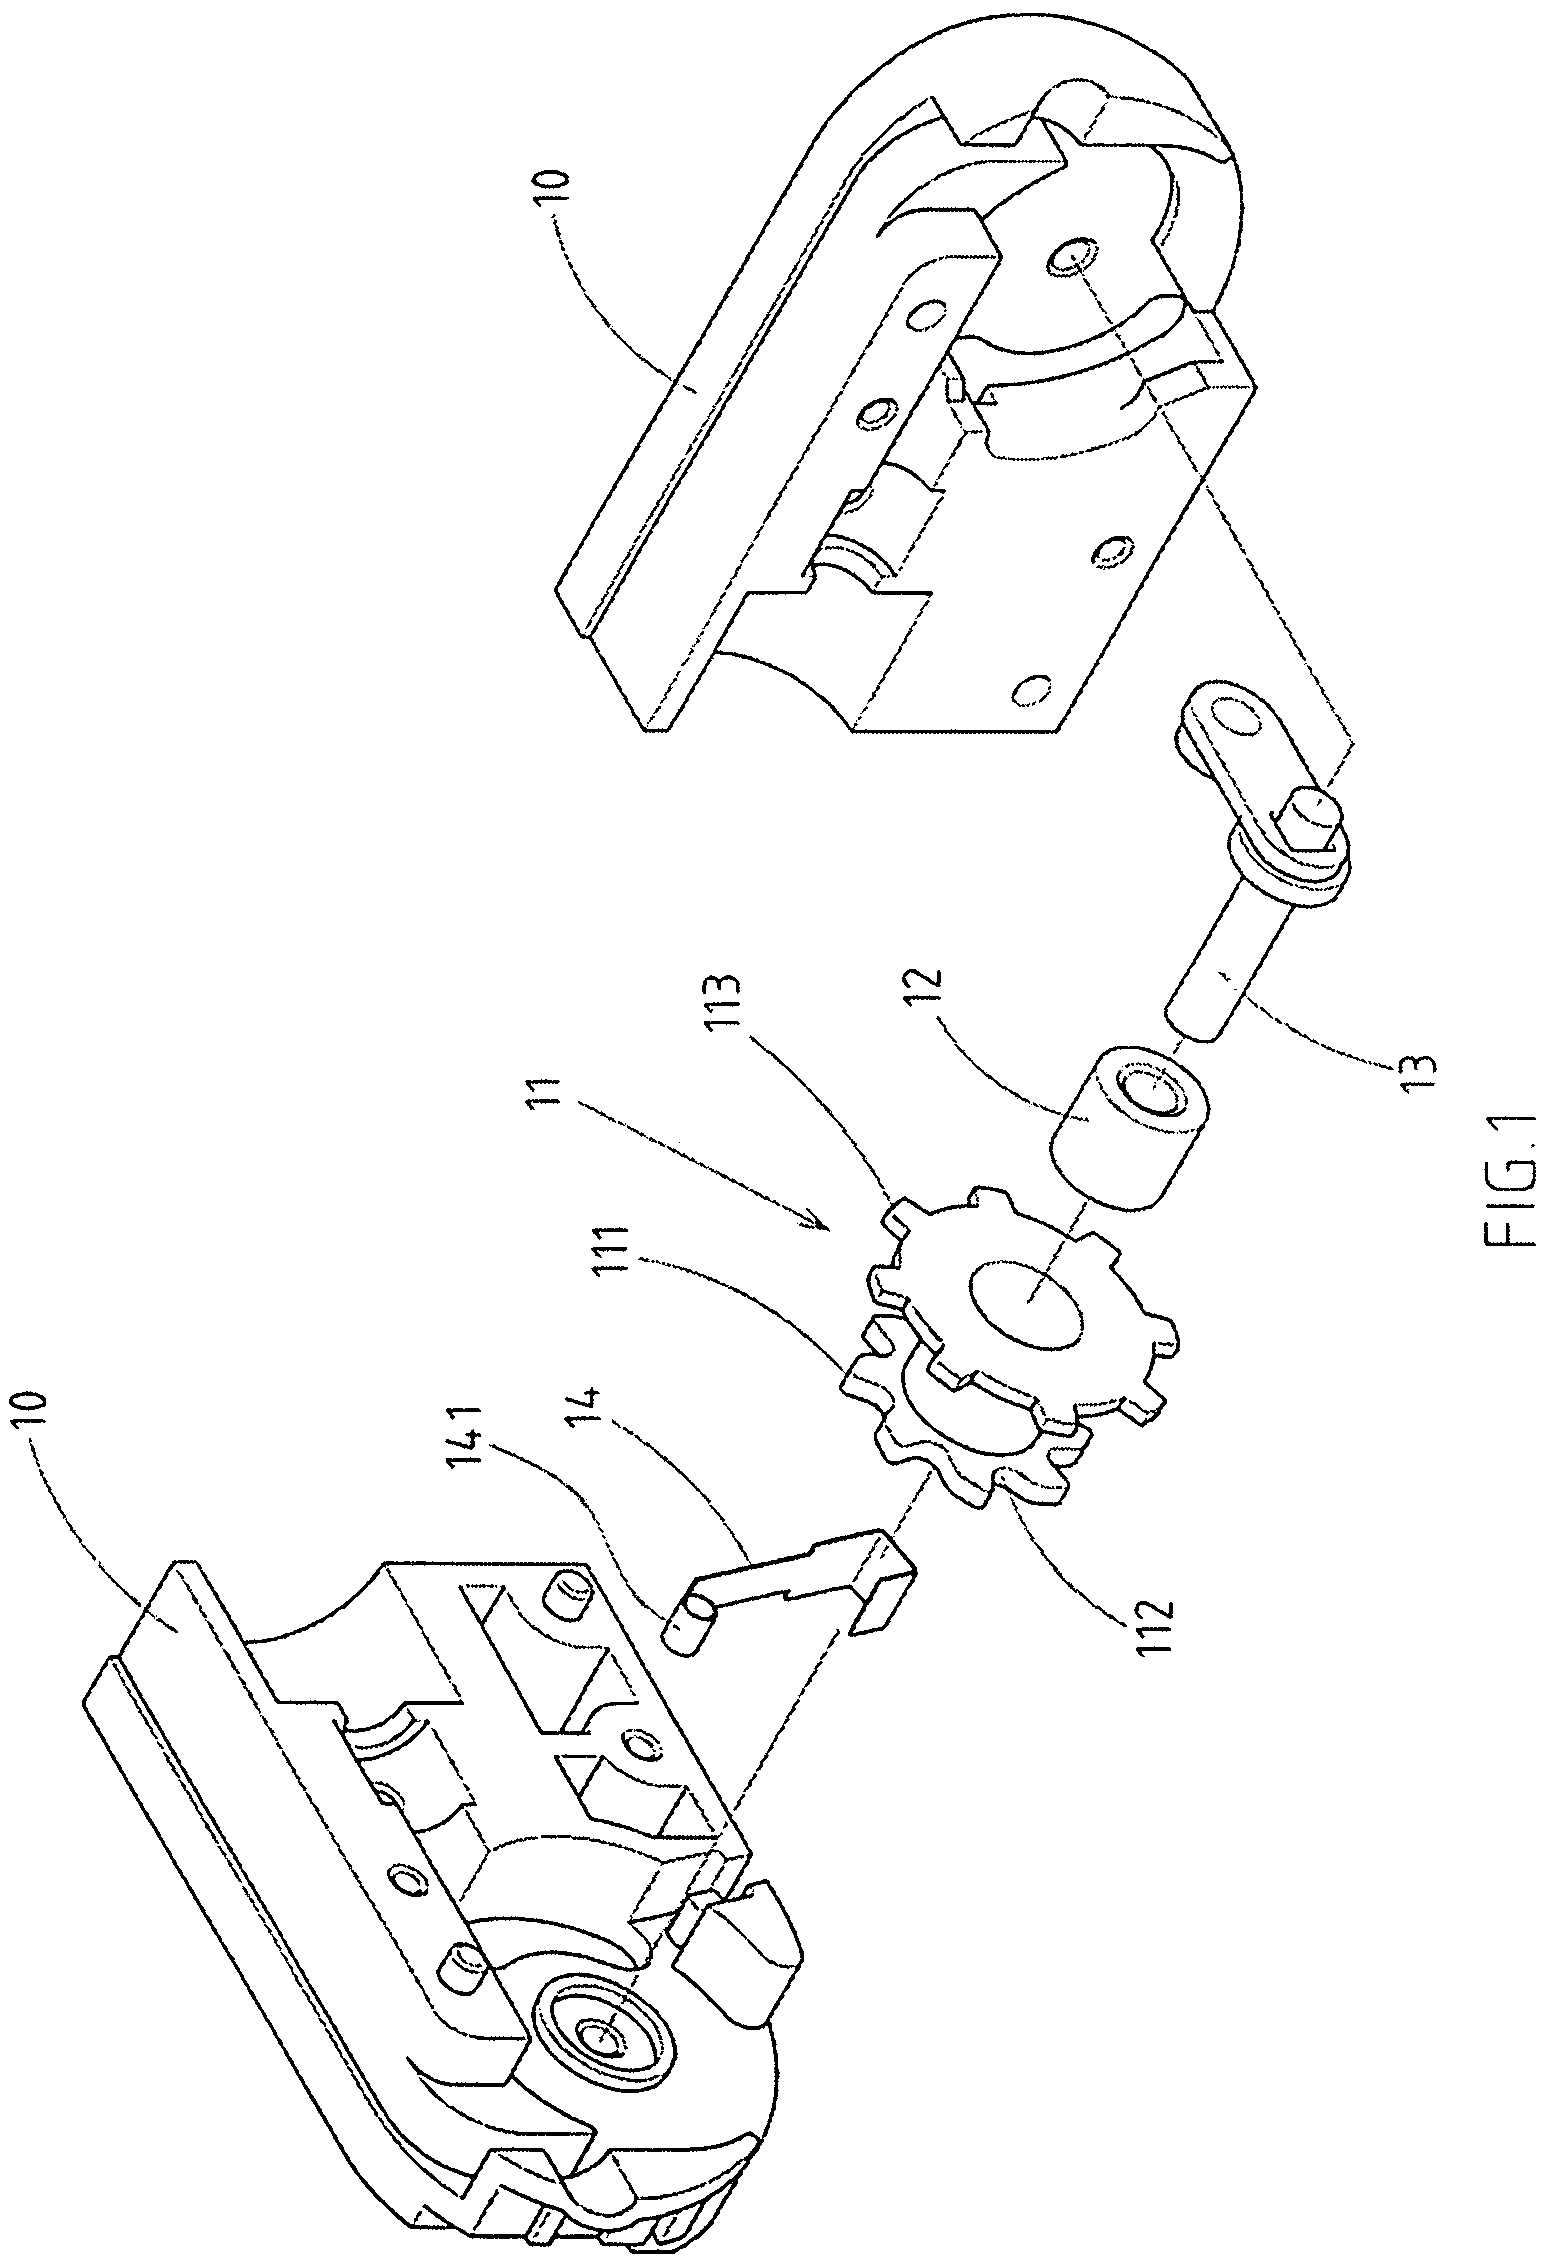 Structure of a screw nailer